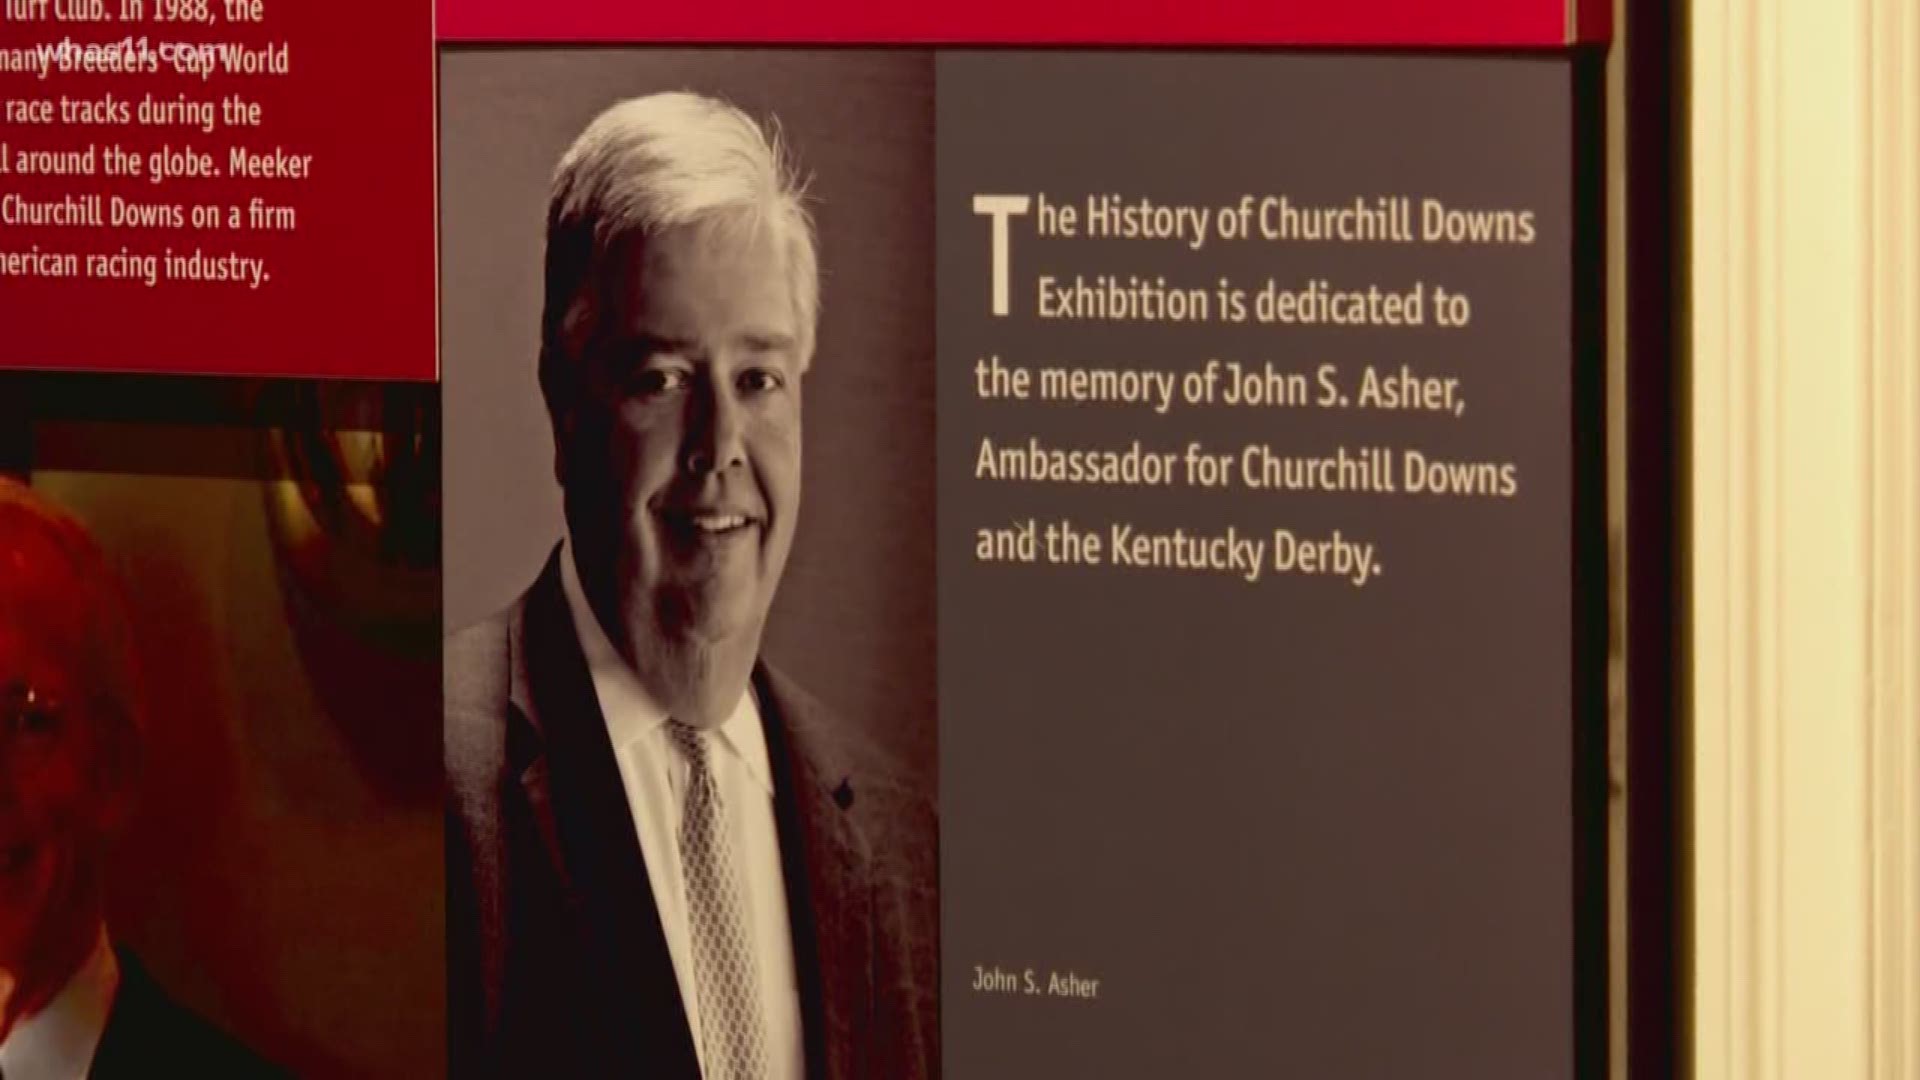 The Kentucky Derby Museum honored John Asher by dedicated the History of Churchill Downs exhibit to the horse-loving former Churchill Downs spokesperson.